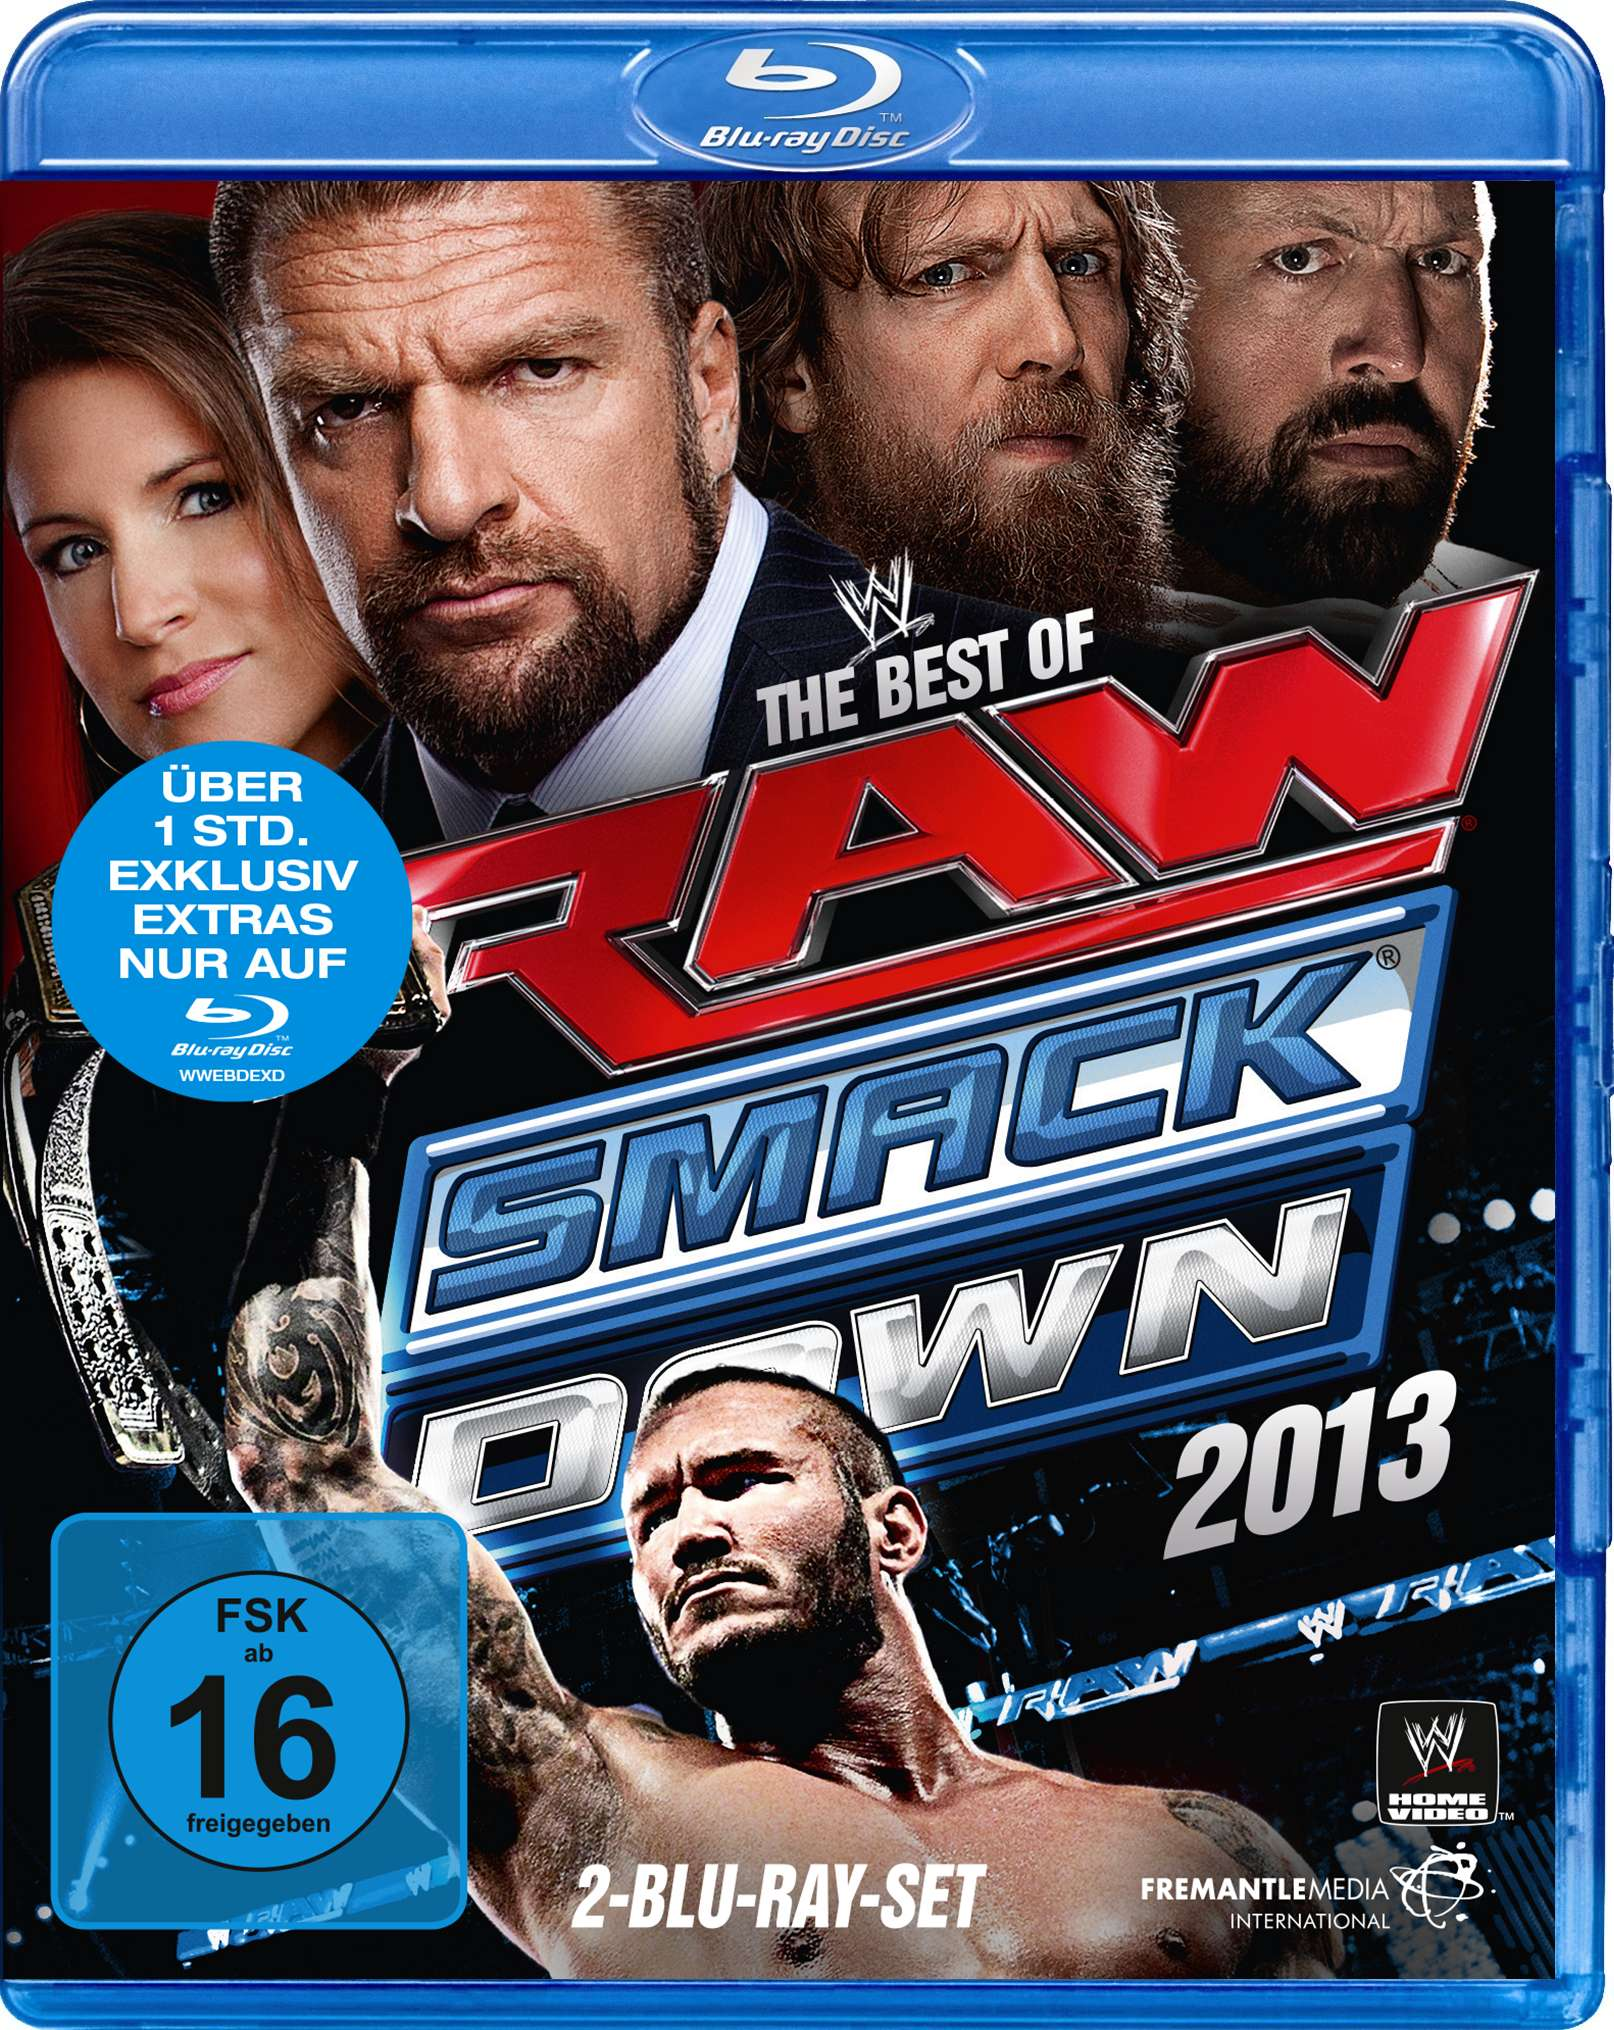 The Best & Smackdown Raw Of 2013 Blu-ray